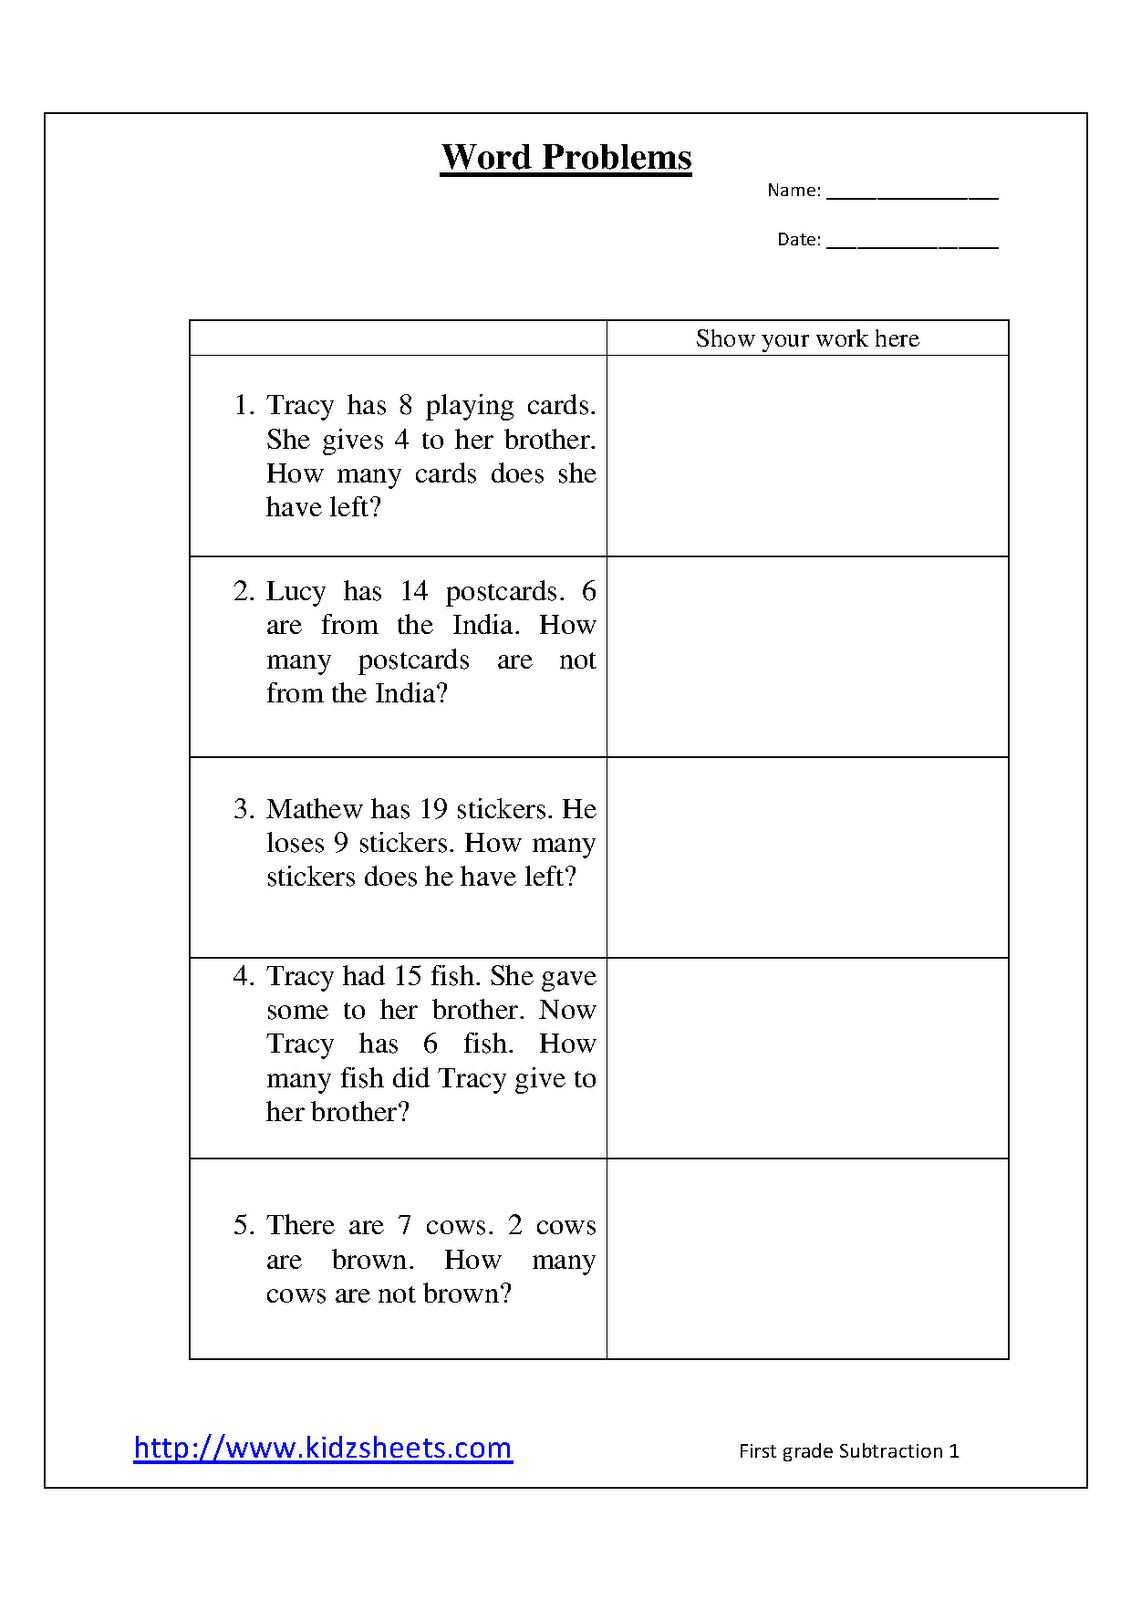 first-grade-word-problems-free-multiplication-word-problem-worksheets-3rd-grade-5-categories